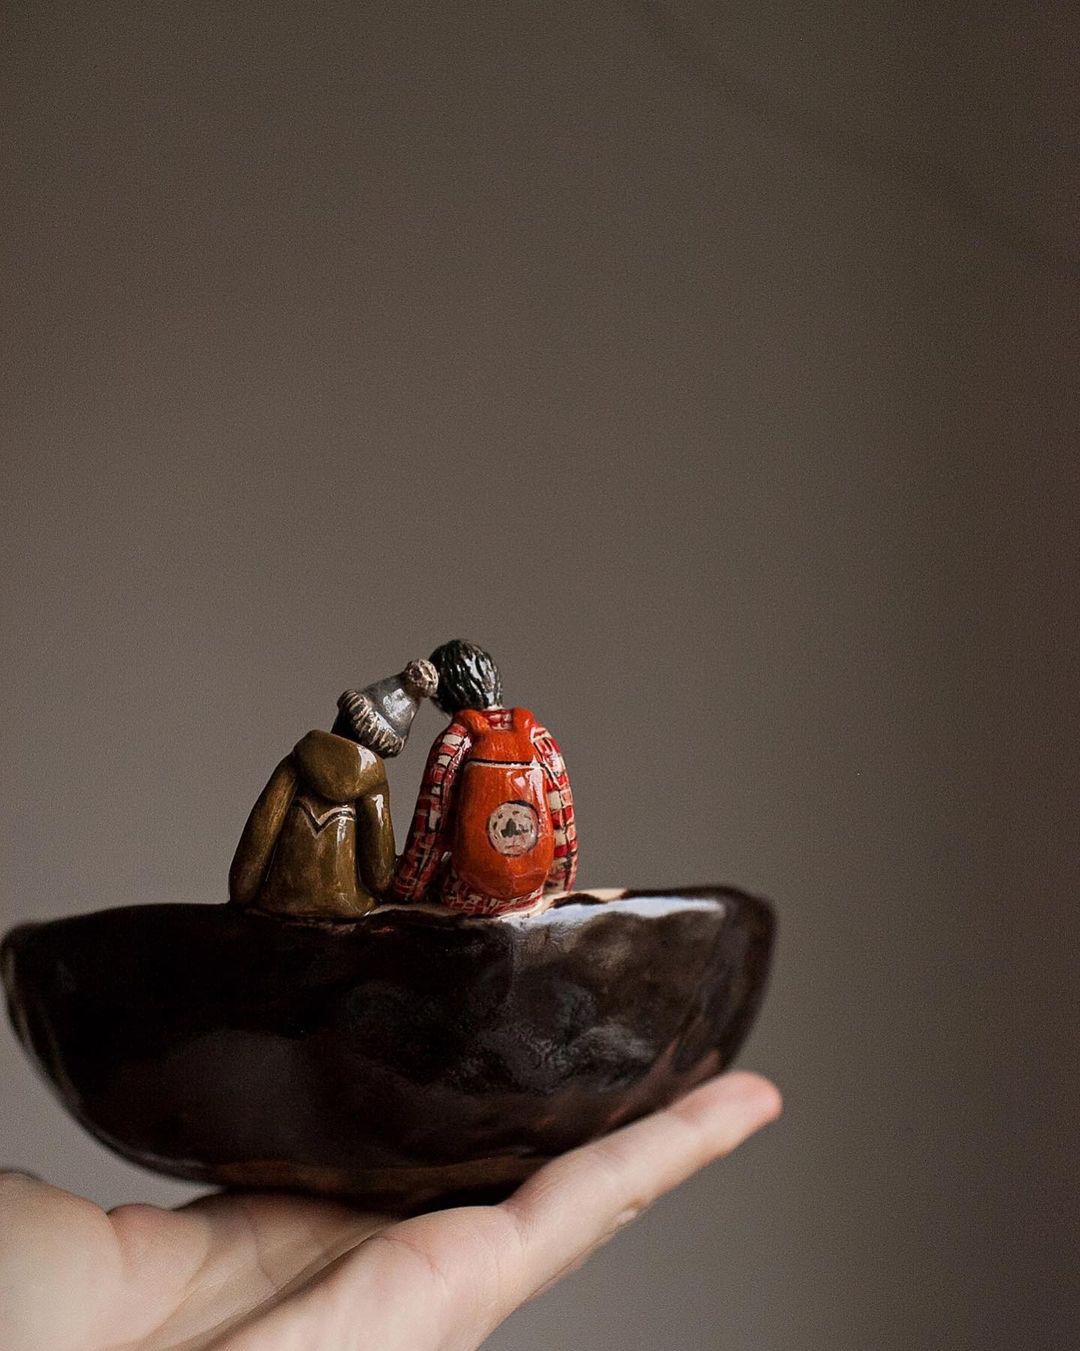 Delicate Ceramics Decorated With Lovely Figure Sculptures By Nadya And Olga (25)